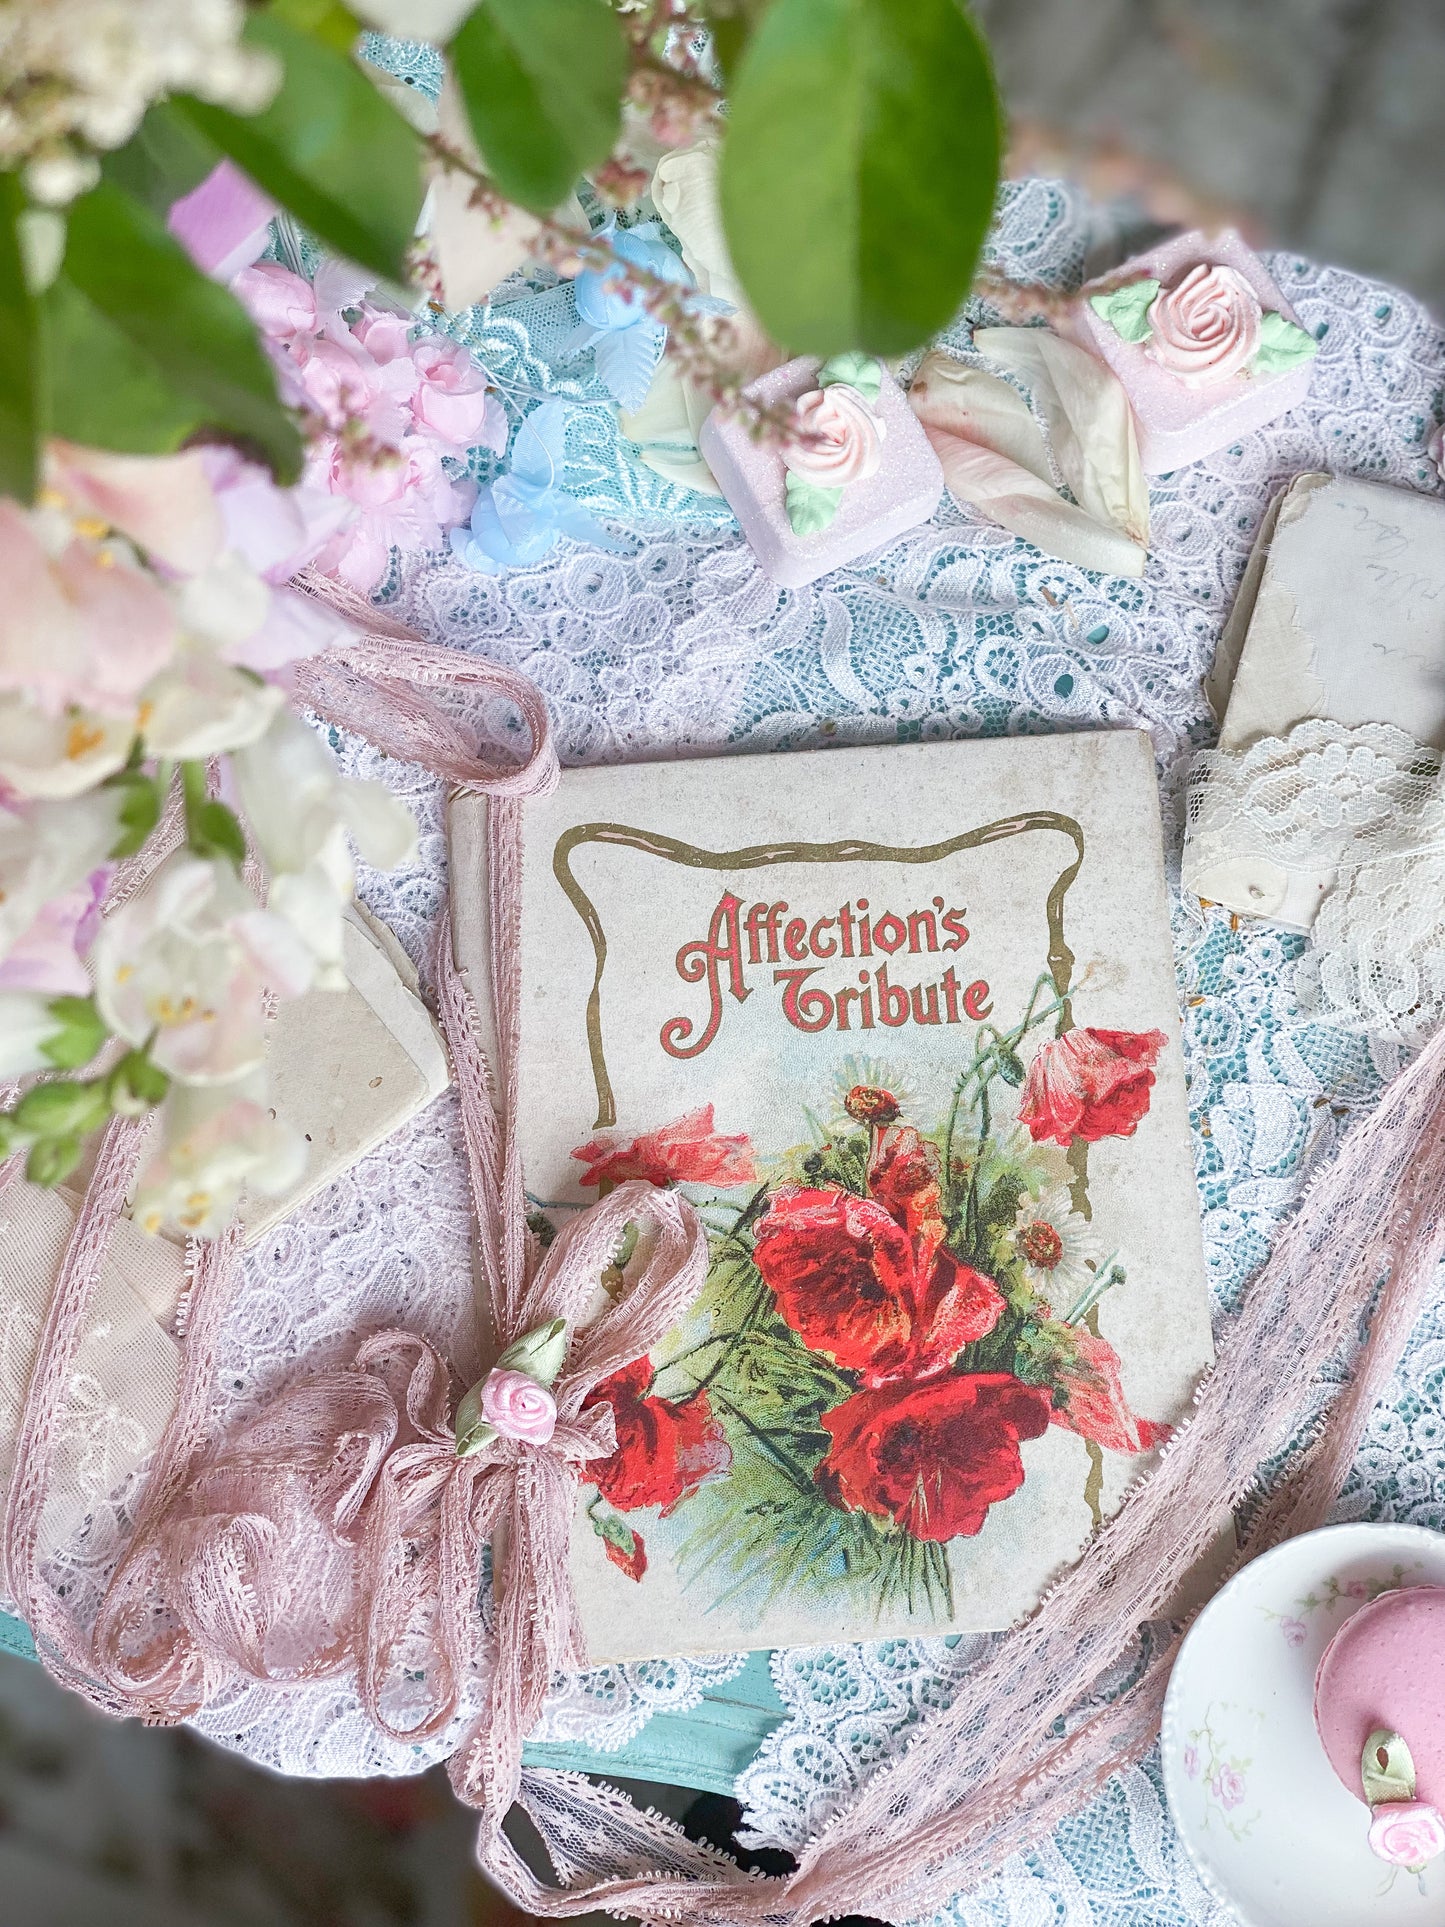 Affection’s Tribute - Edwardian Gift Book